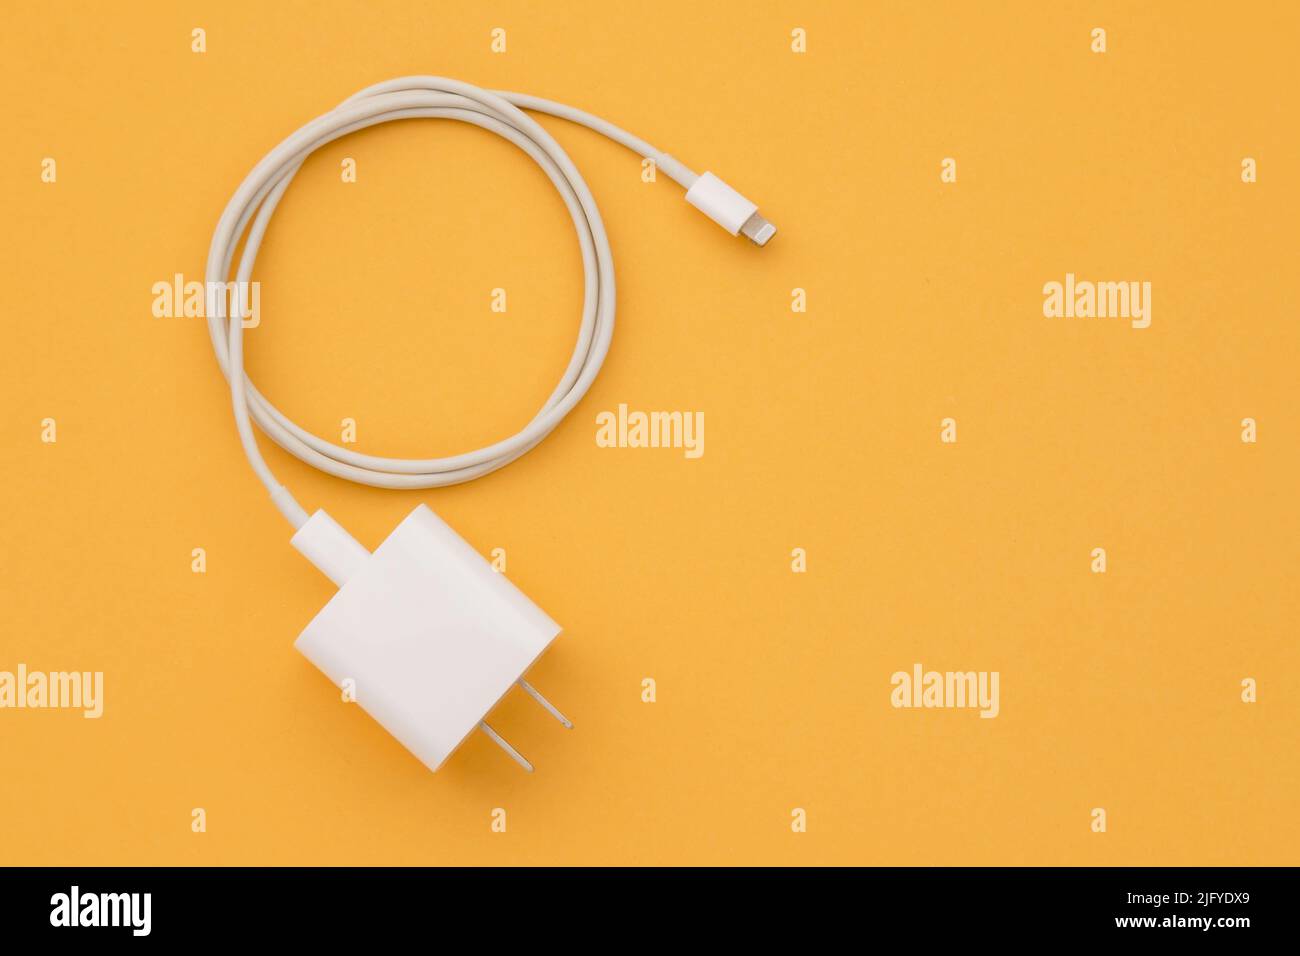 Top view new white smartphone charger on orange background with copy space for text or design Stock Photo